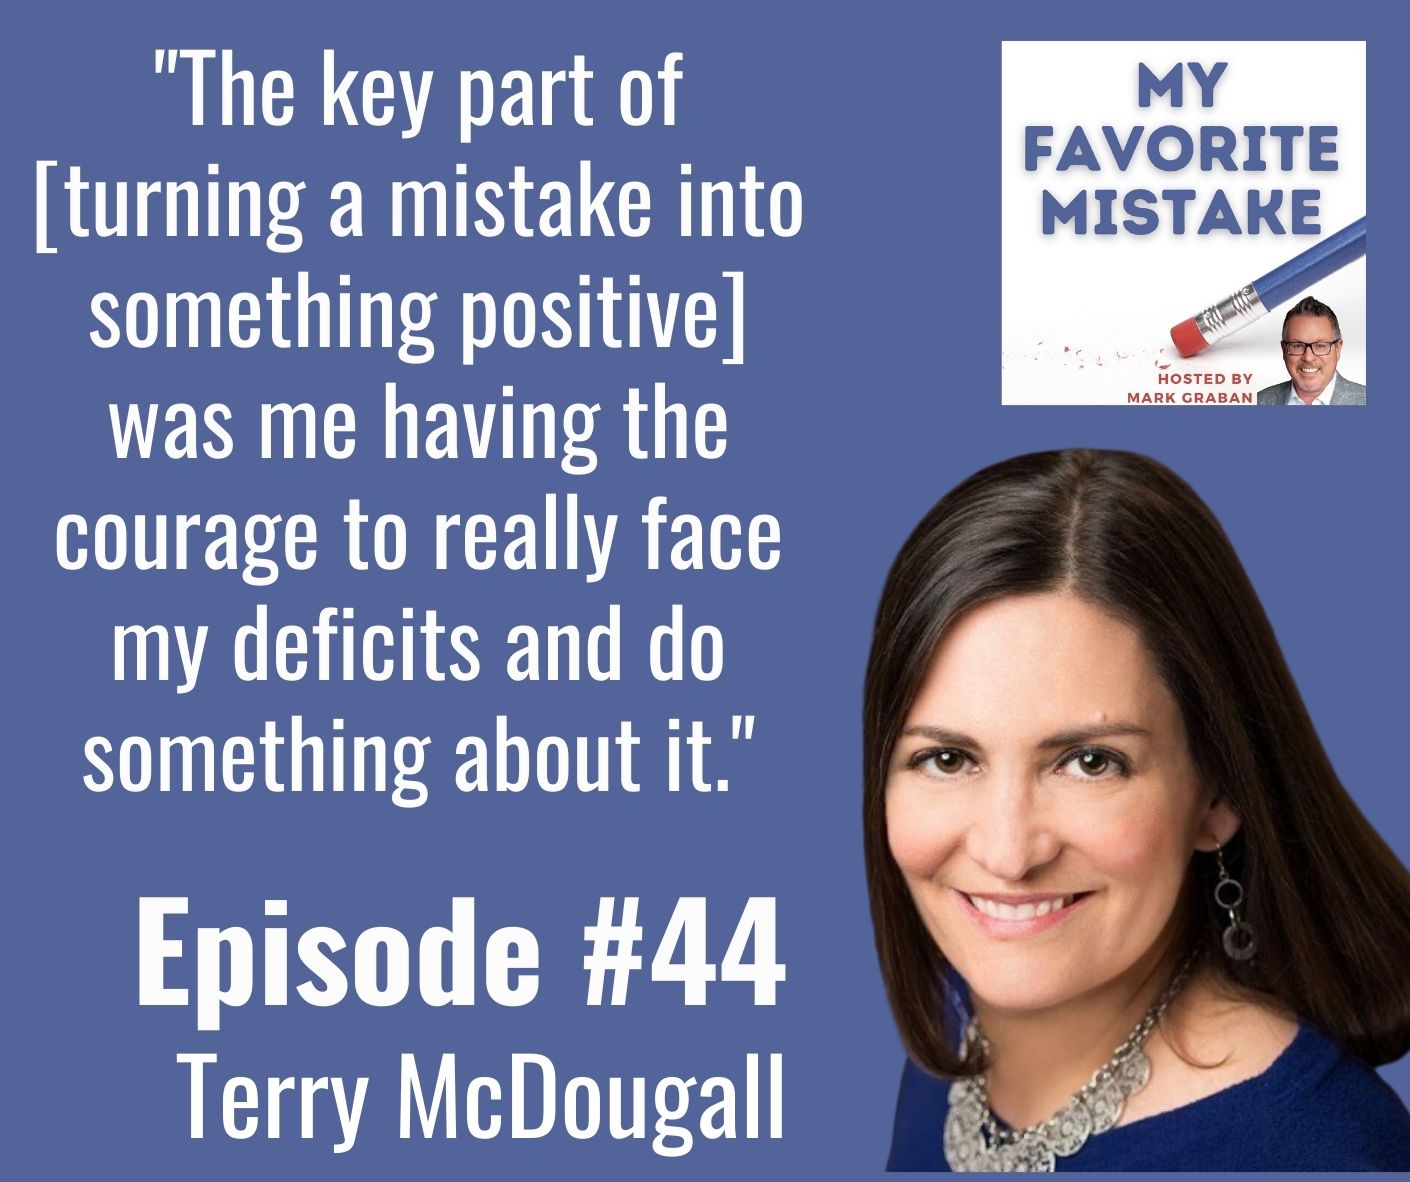 "The key part of [turning a mistake into something positive] was me having the courage to really face my deficits and do something about it."